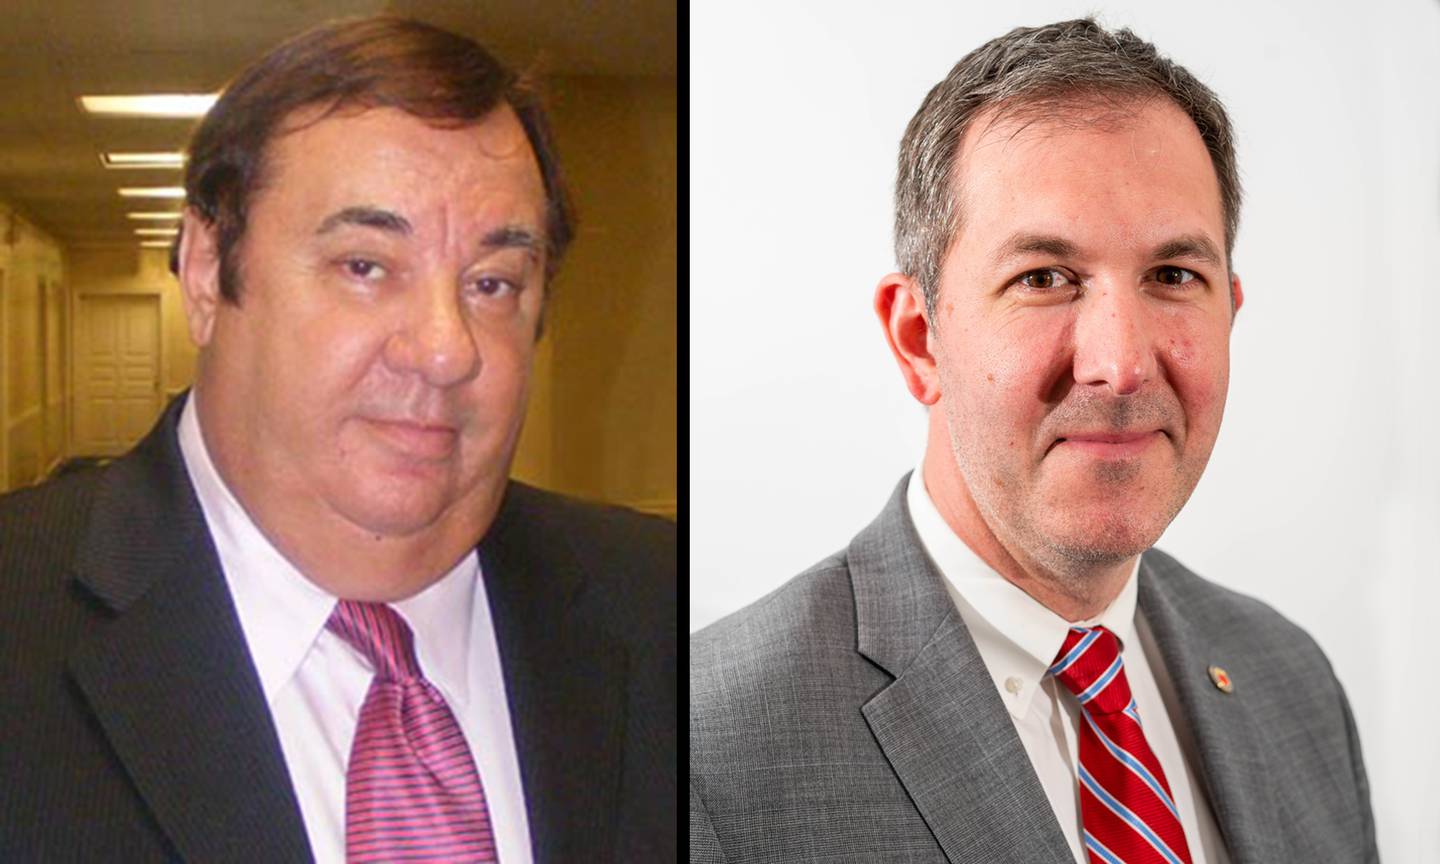 (right) Baltimore County Executive Johnny Olszewski is facing off against (left) former Republican Delegate Pat McDonough during the general election in November.